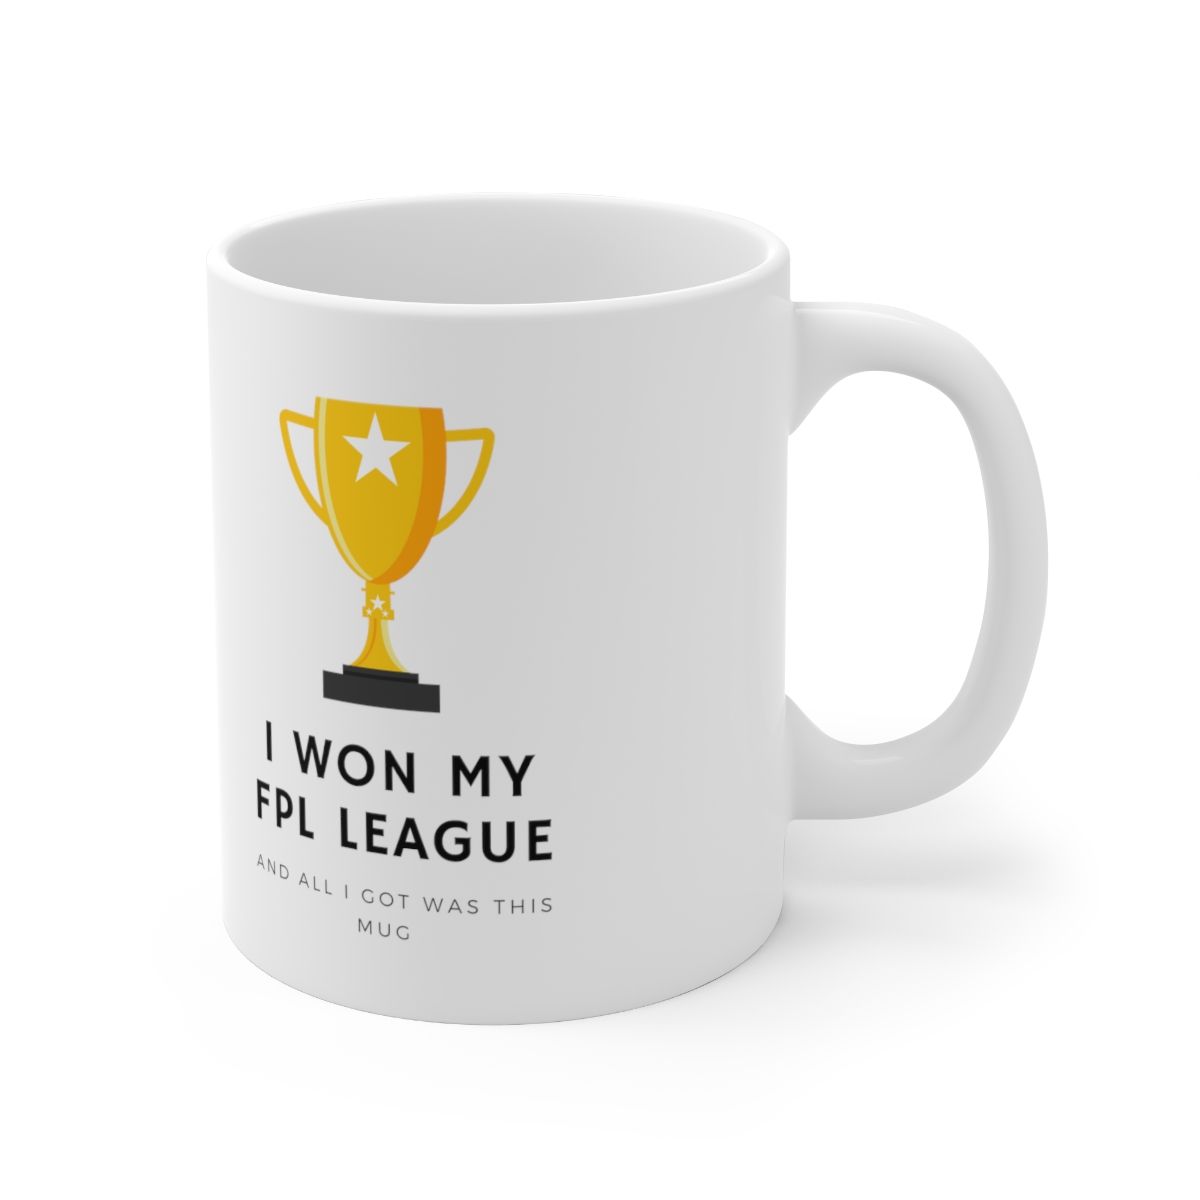 I Won My FPL League and All I Got Was This Mug – White